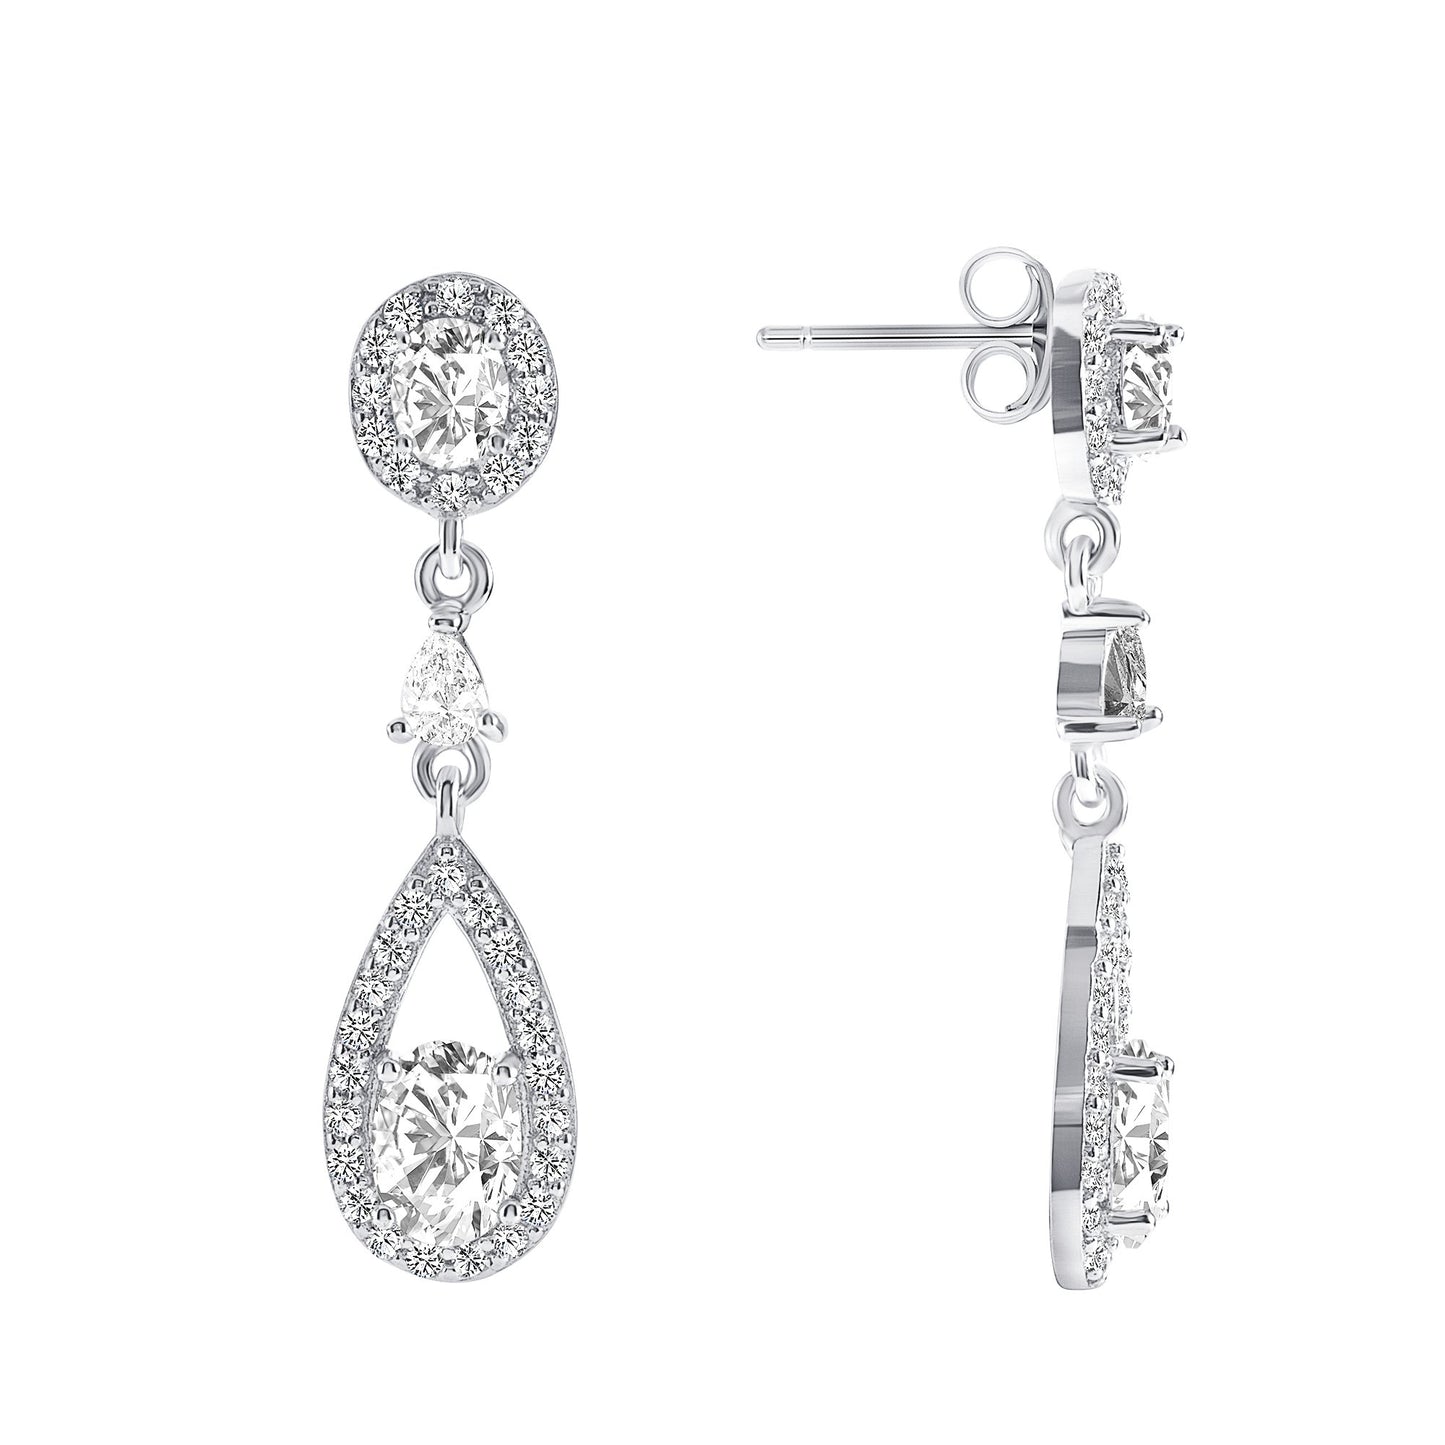 Silver 925 Rhodium Plated Dangling Clear Cubic Zirconia Earrings. DGE1008CLR